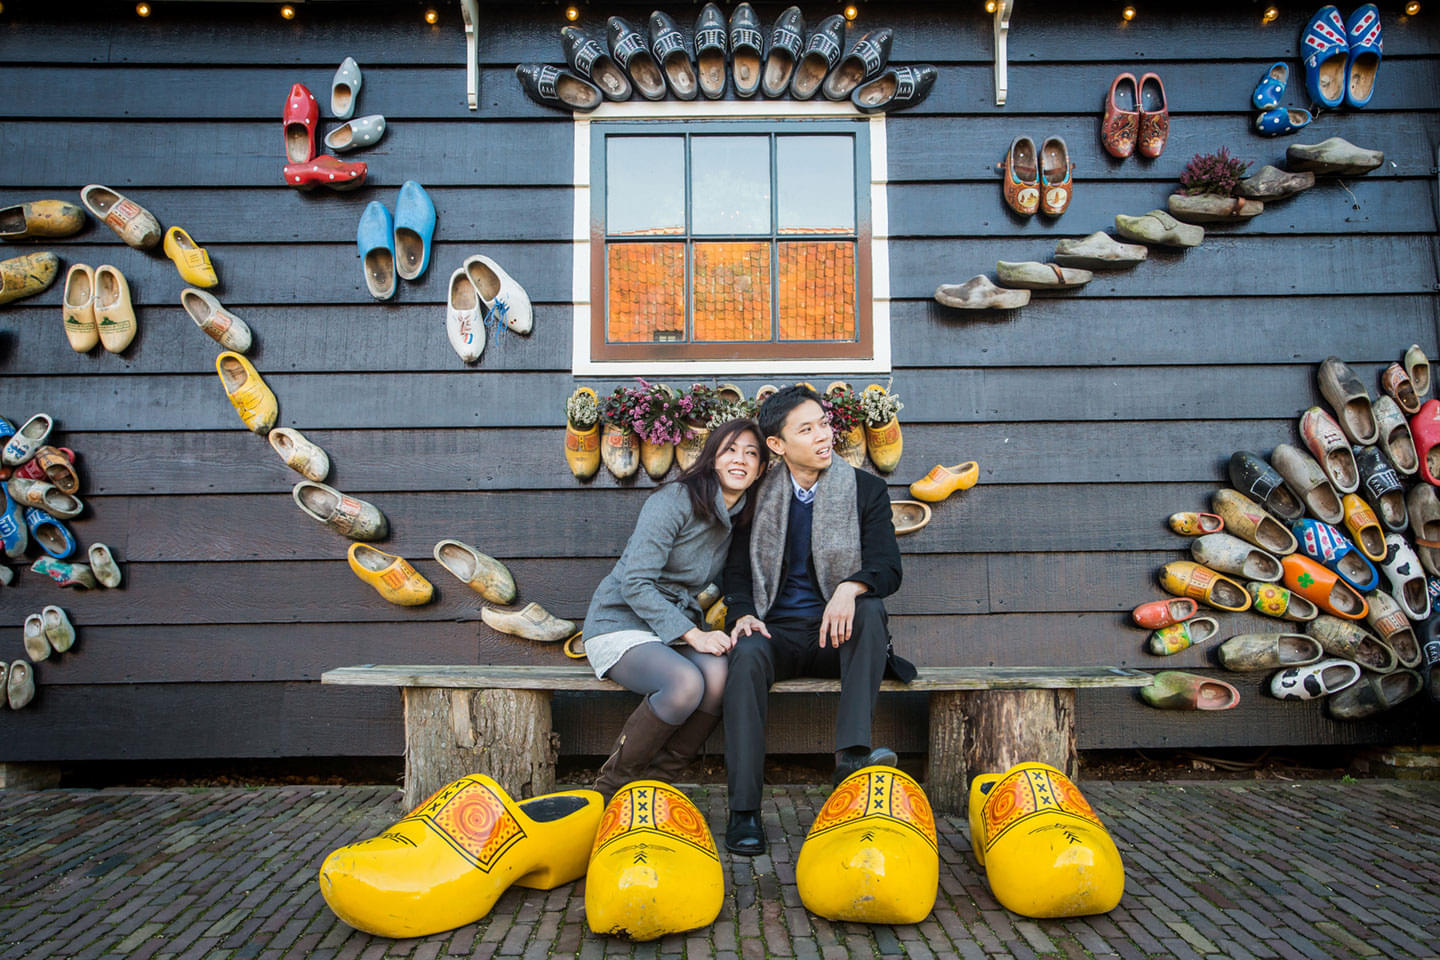 Spend quality time with your loved ones while visiting the wooden clog factories